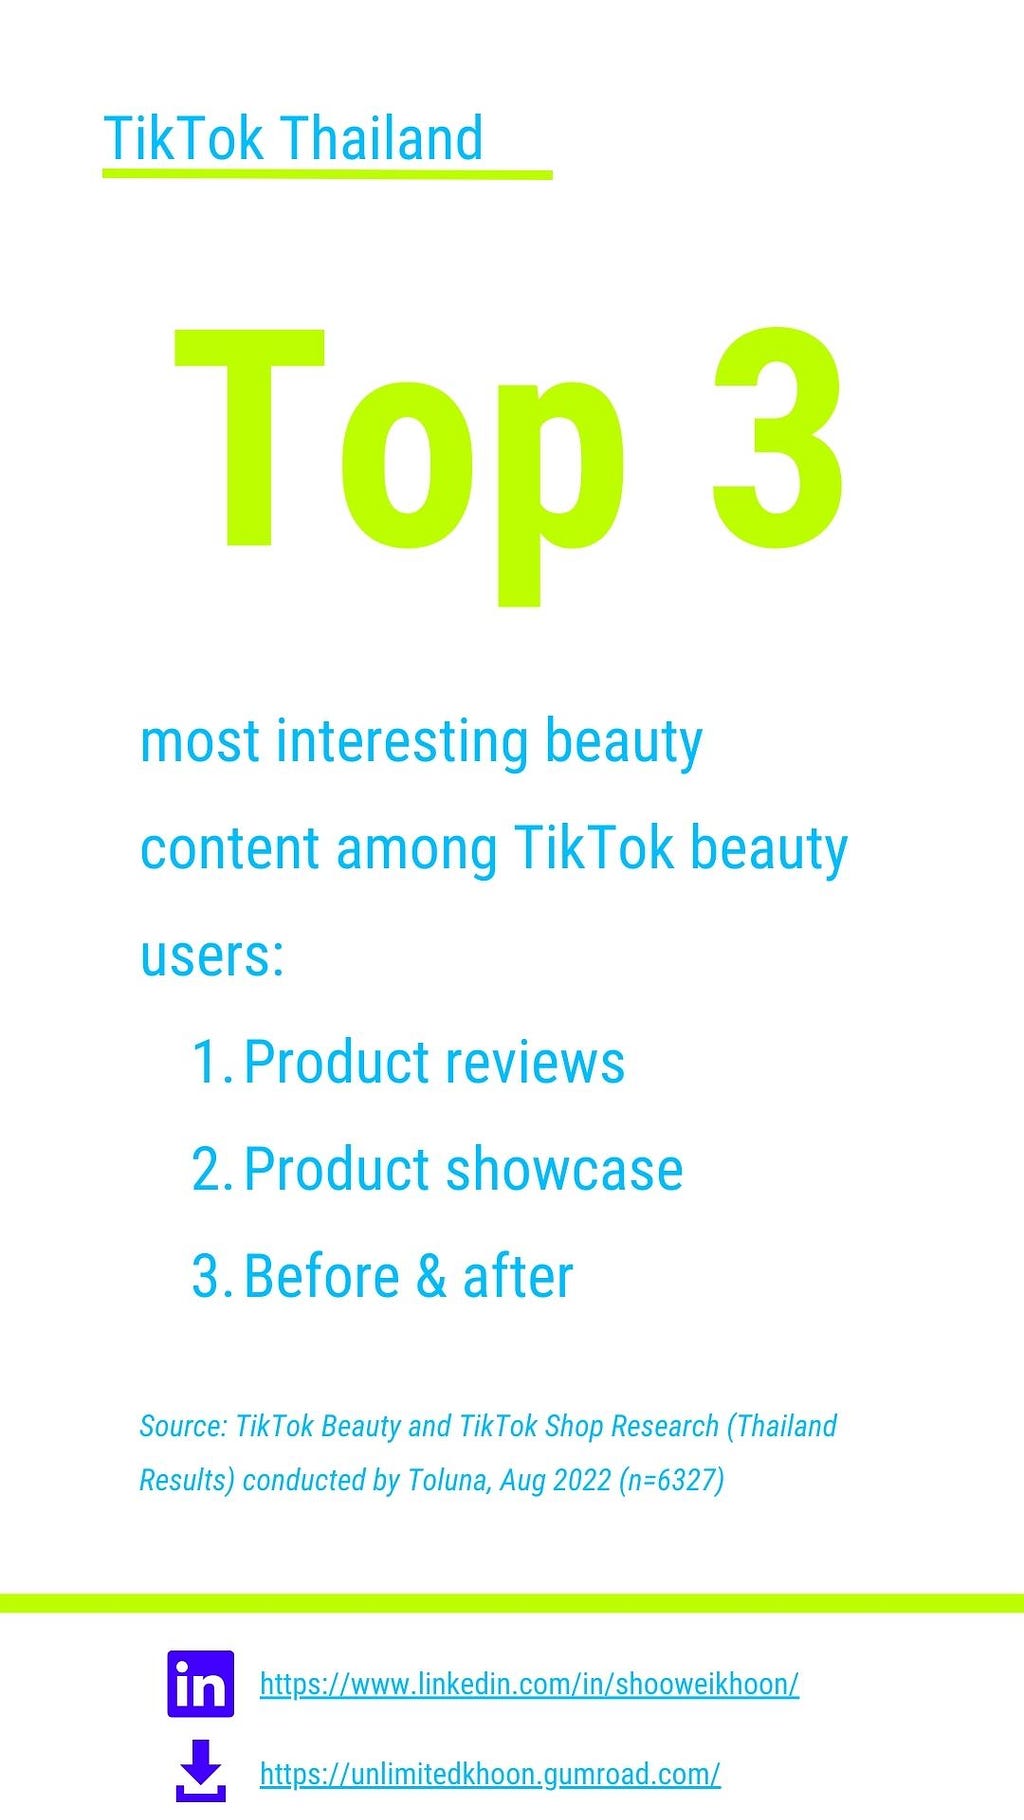 Top 3 most interesting beauty content among Thailand TikTok beauty users